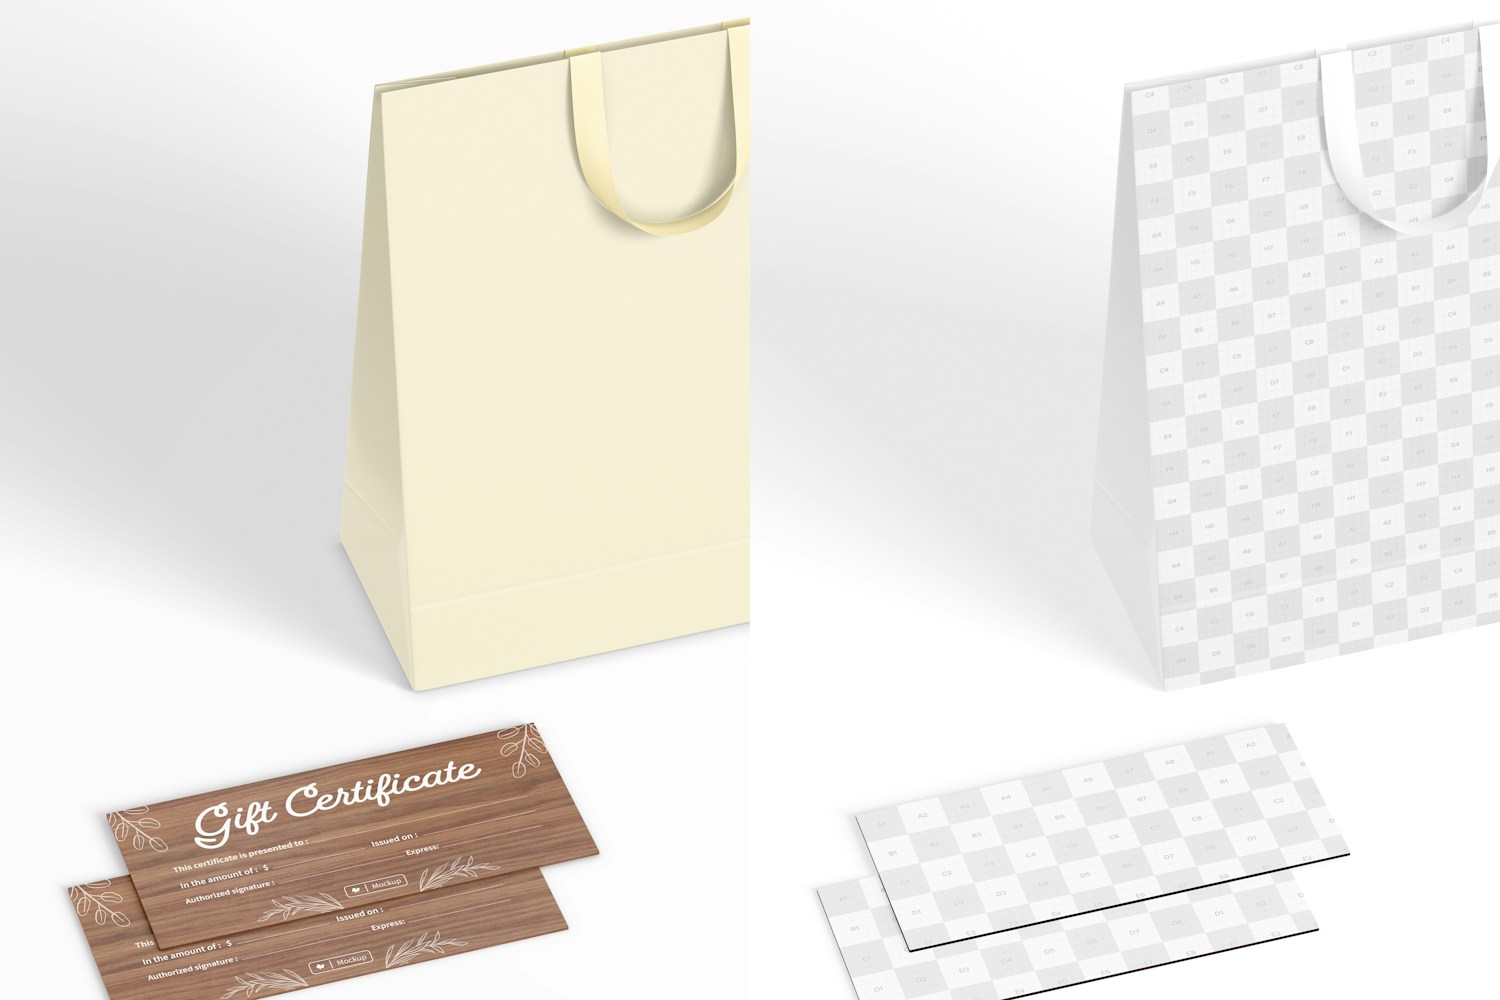 Rustic Gift Certificates with Bag Mockup, Perspective